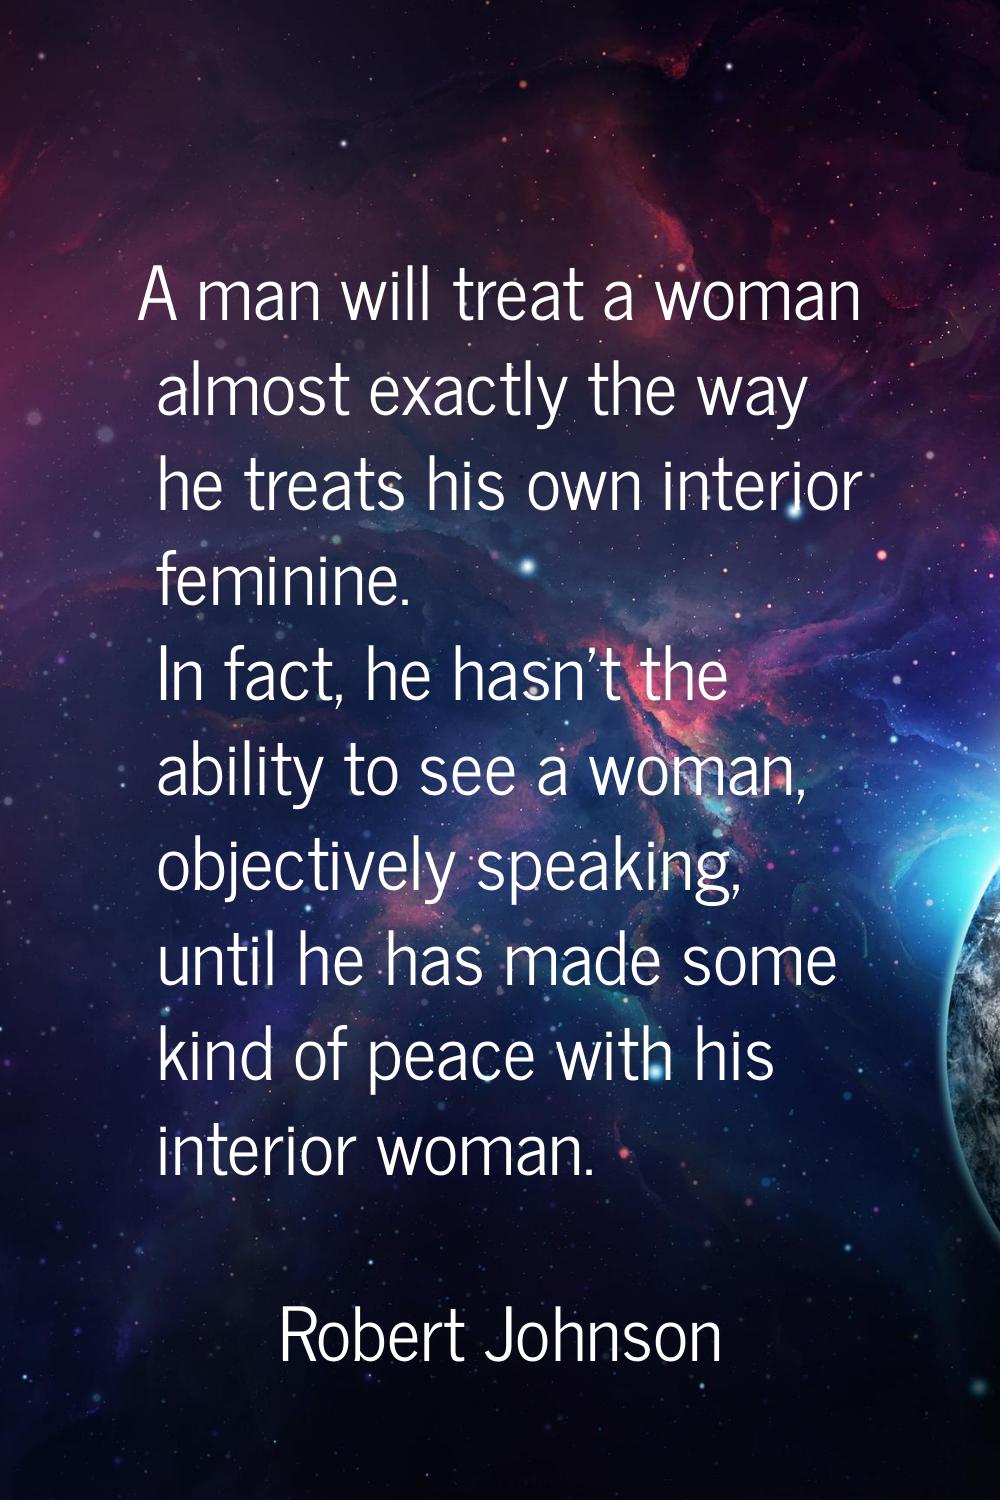 A man will treat a woman almost exactly the way he treats his own interior feminine. In fact, he ha